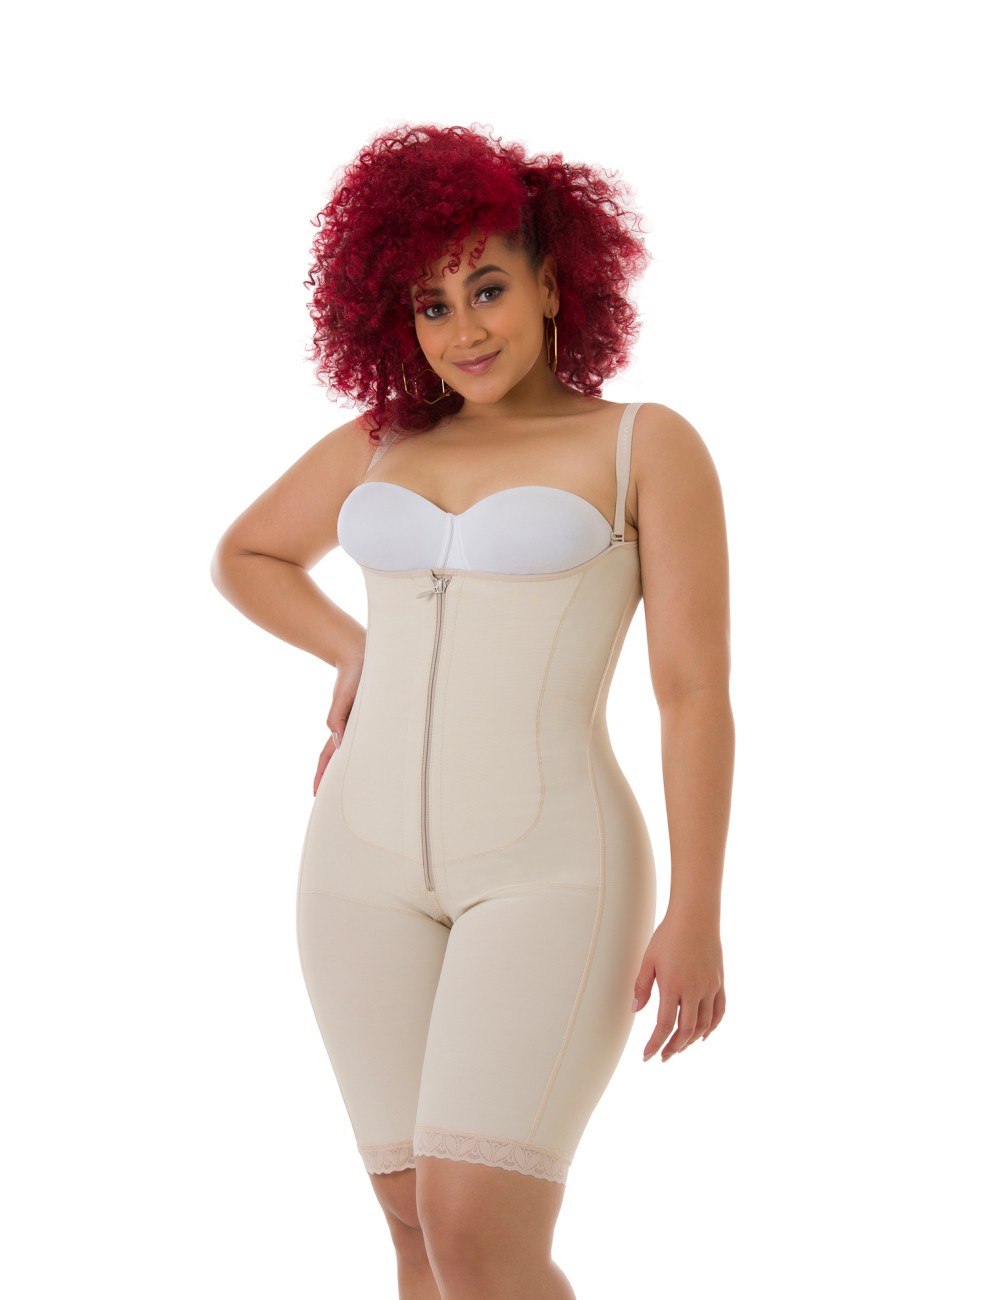 Colombian Compression Girdle For Full Body Shaping, Tummy Control